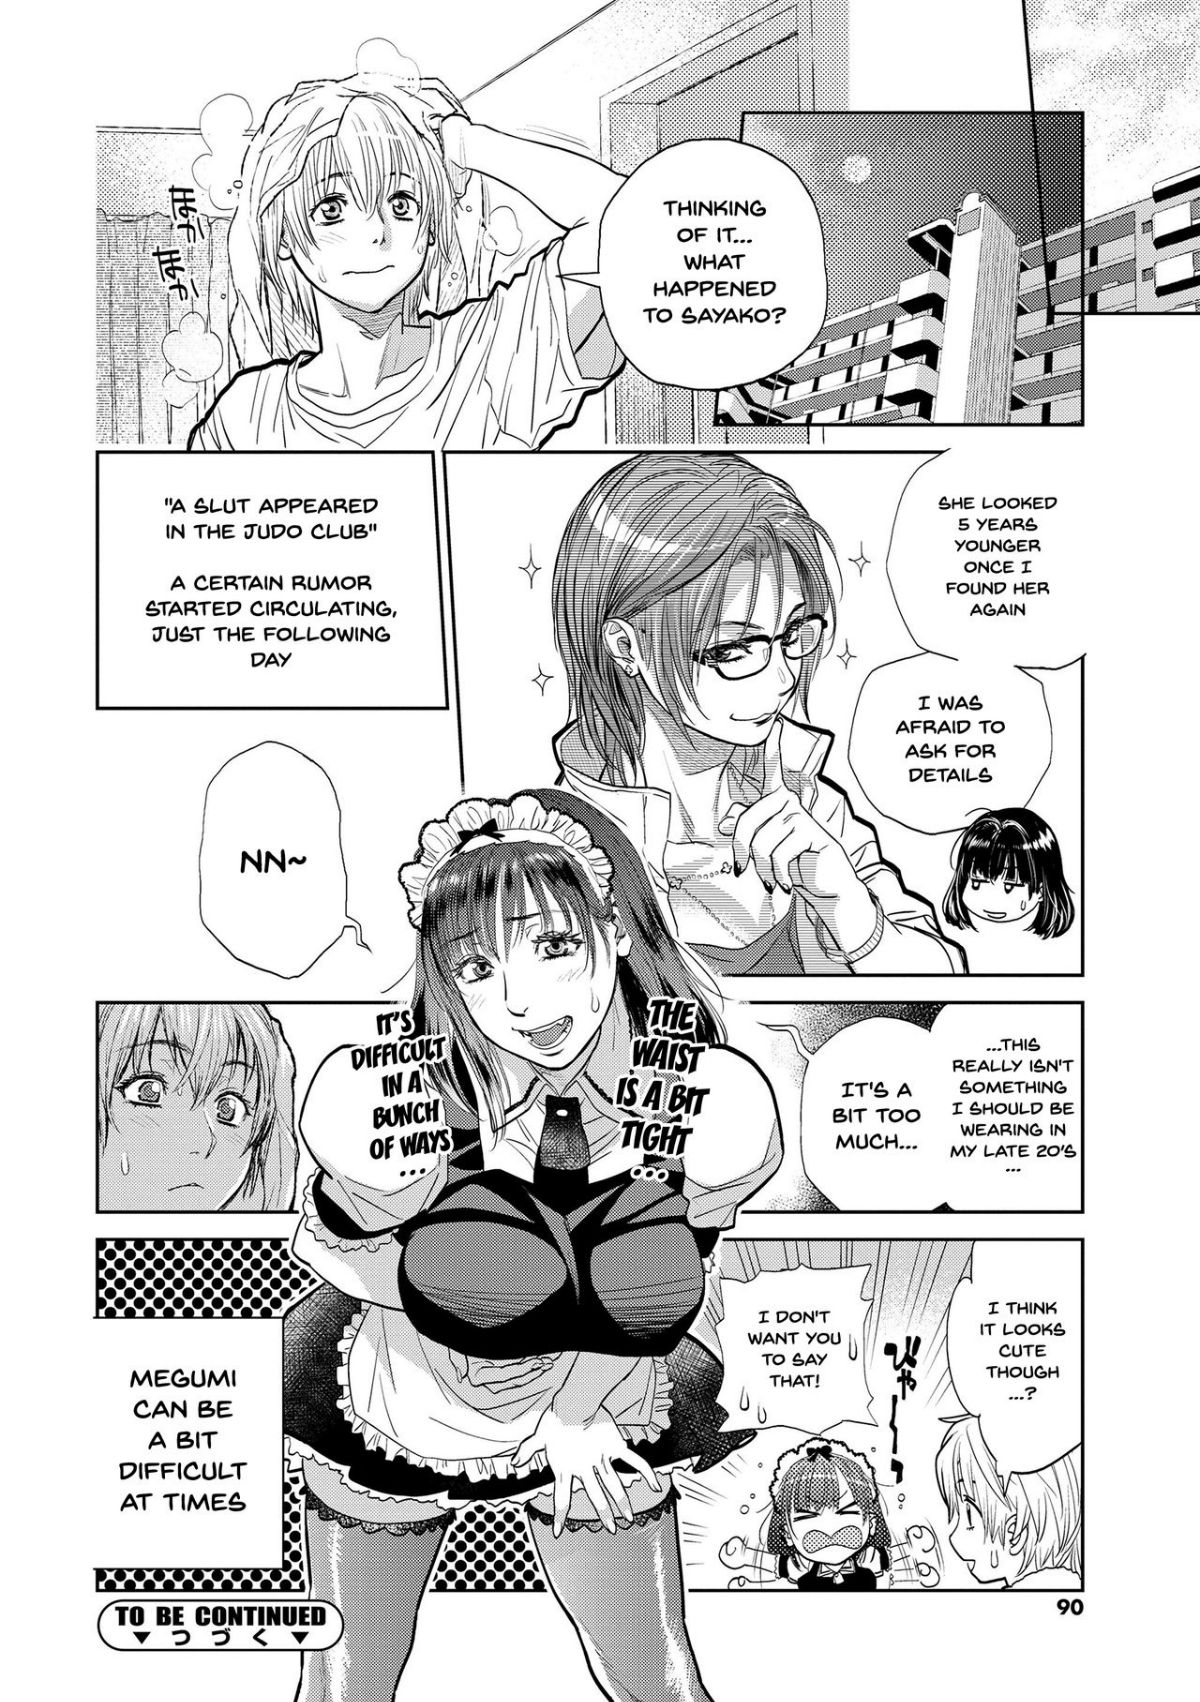 Together With My Older Cousin part 4 Hentai english 28